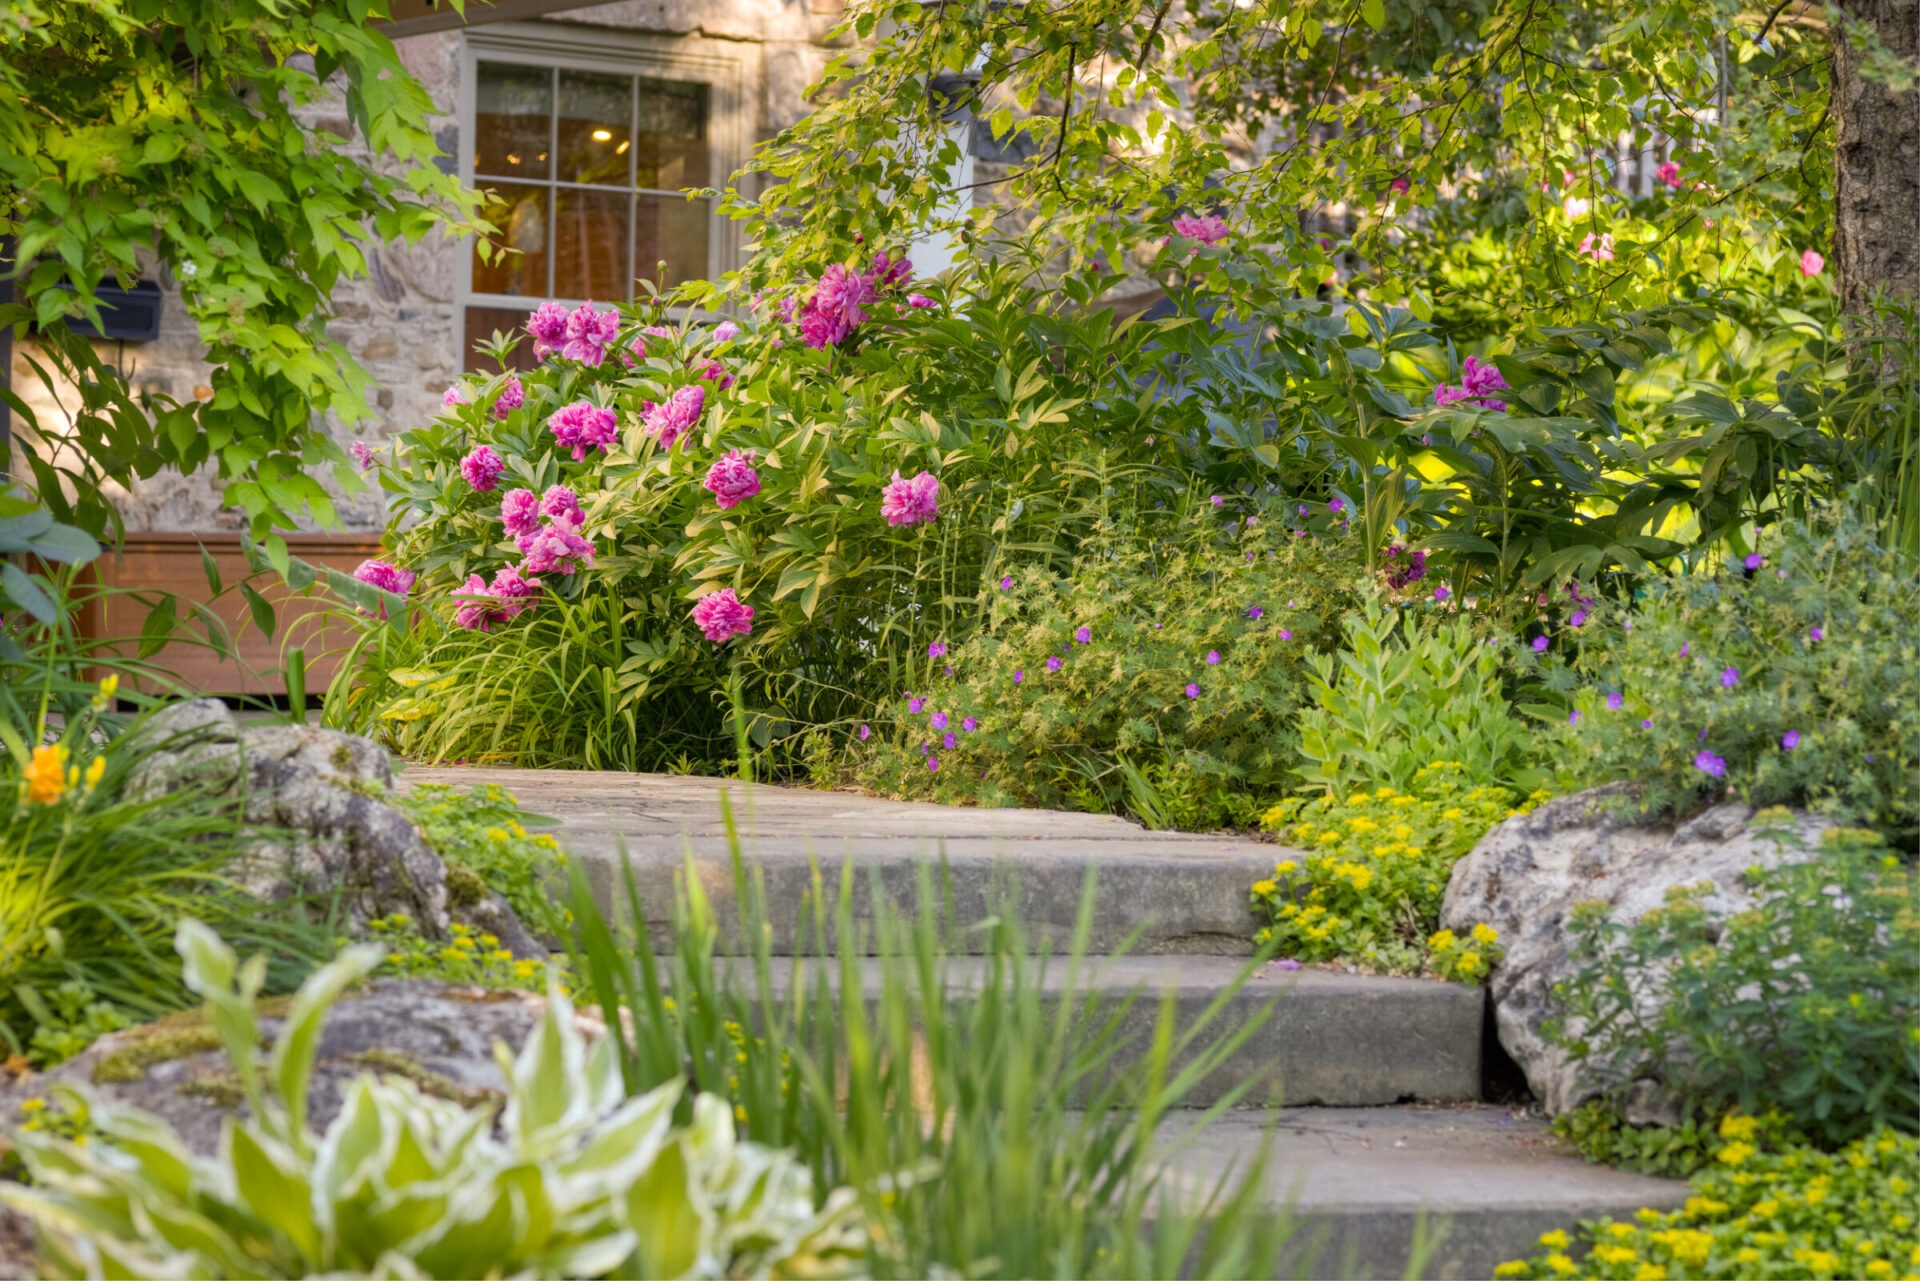 A tranquil garden path with flourishing pink flowers, lush greenery, stone steps, and a glimpse of a traditional stone building in the background.